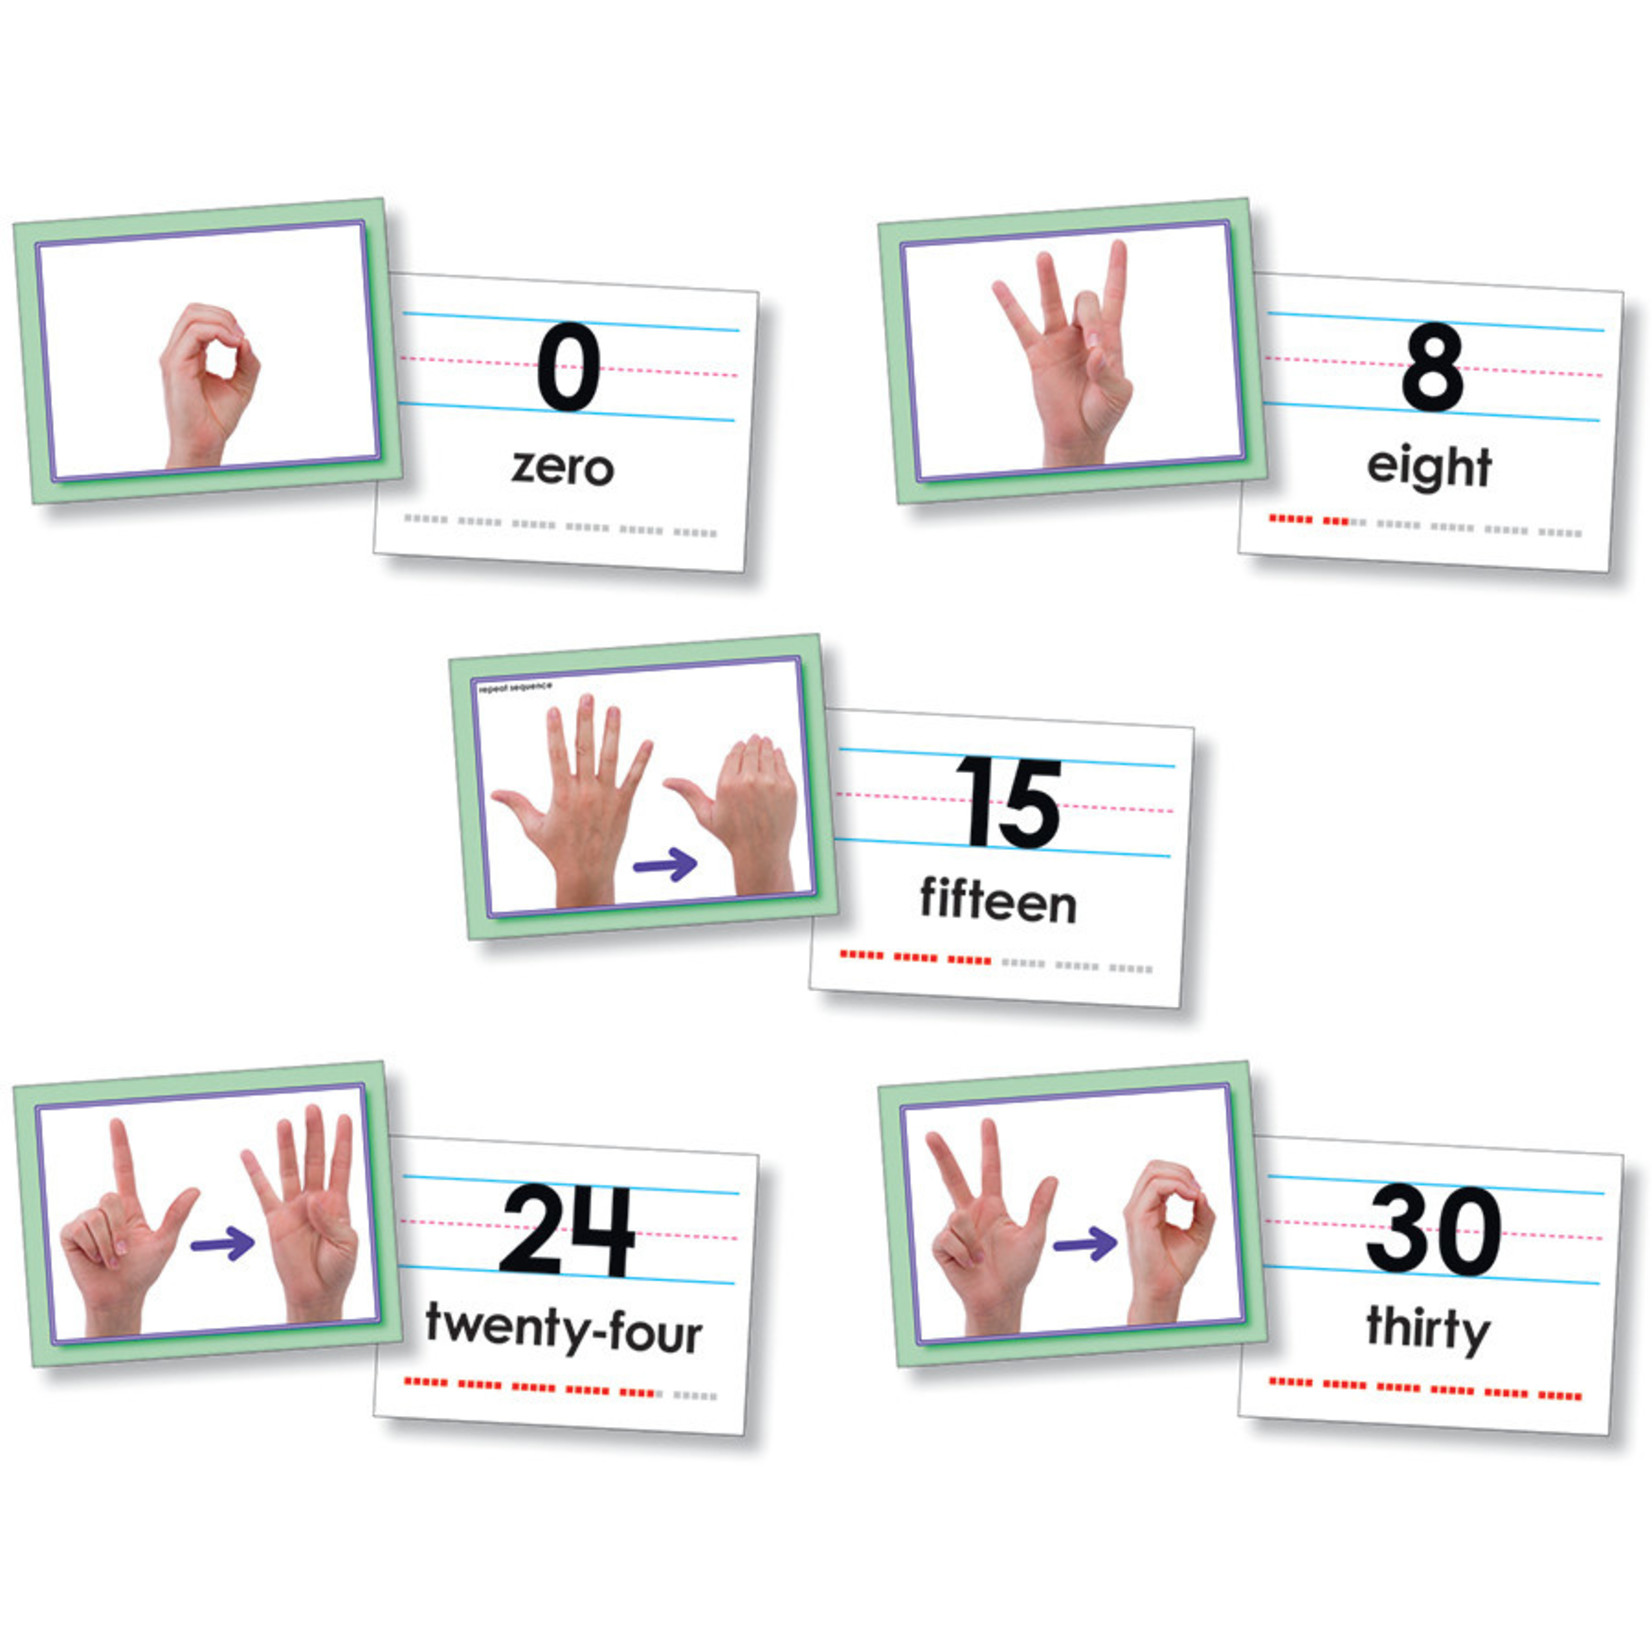 NORTH STAR TEACHER RESOURCES American Sign Language Numbers 0-30 Photo Cards